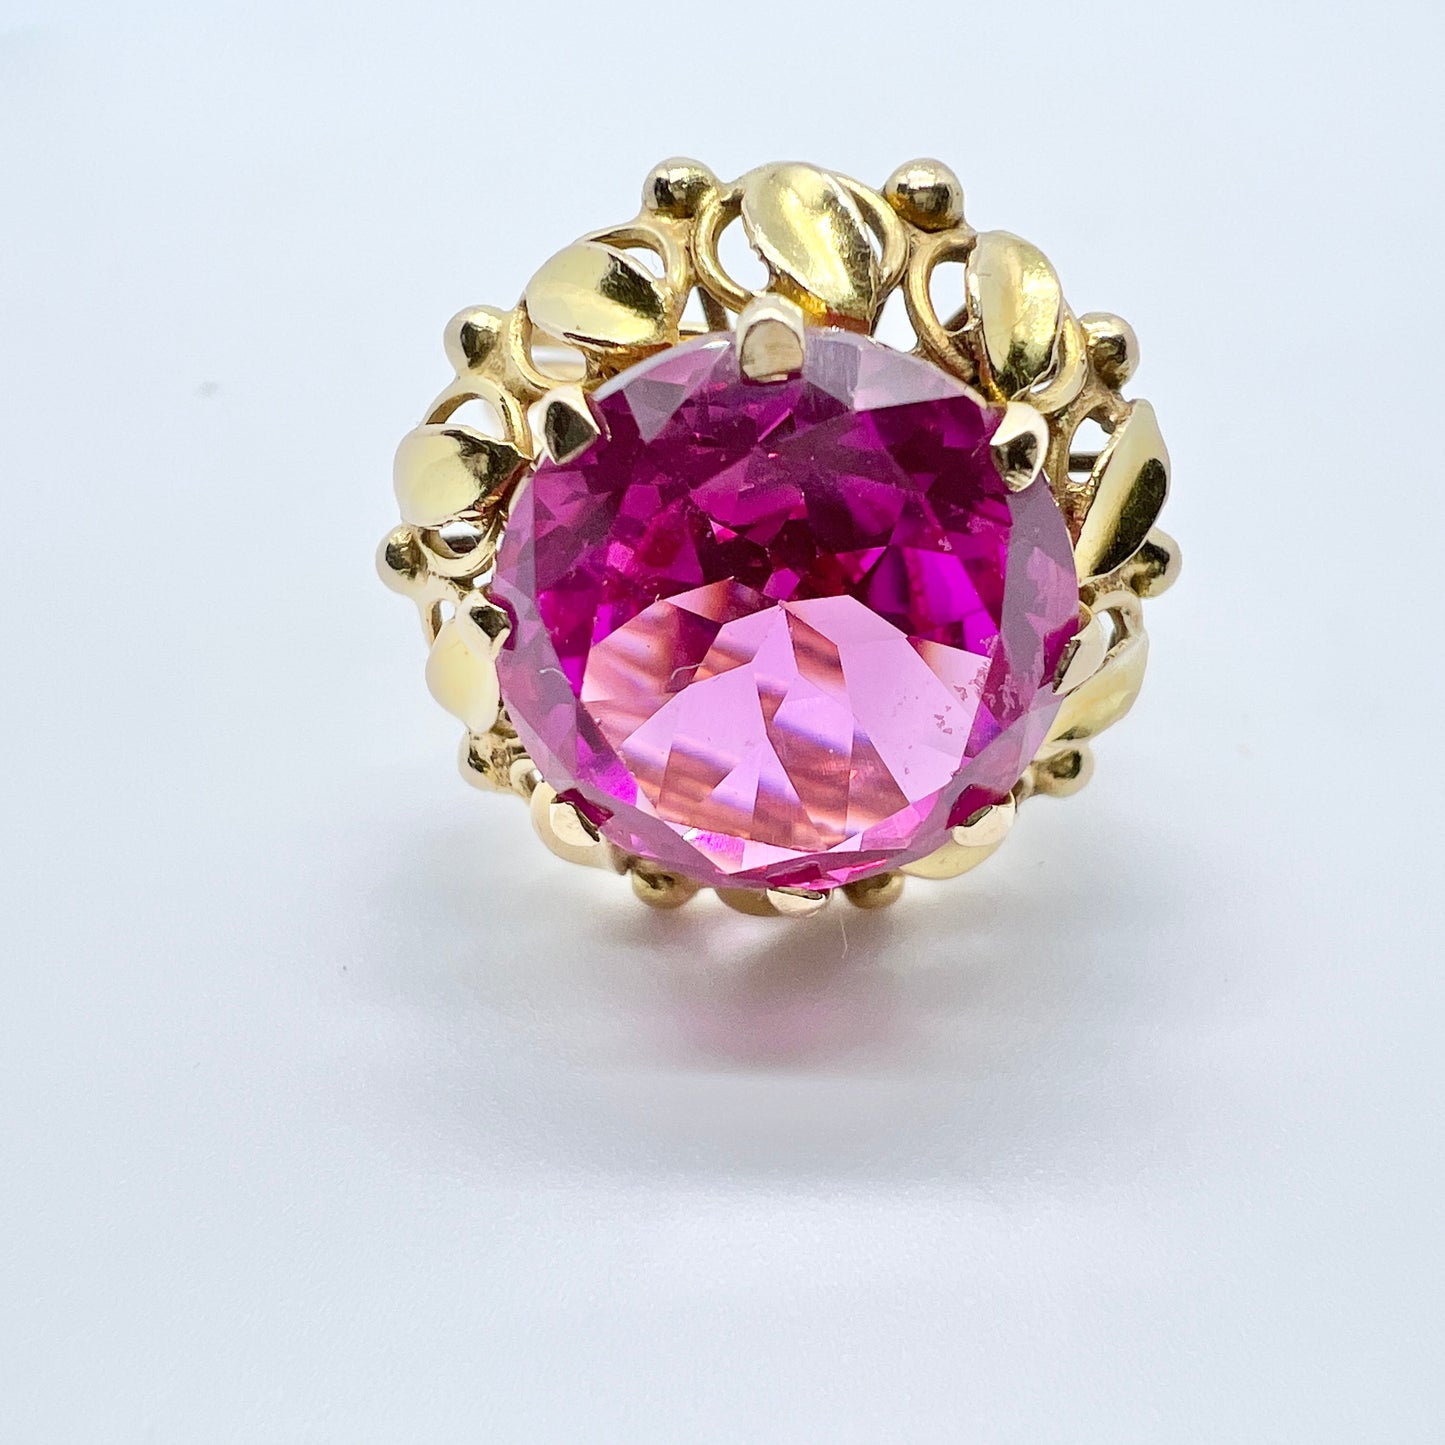 Vintage 14k Gold Synthetic Pink Sapphire Ring. Possibly Lebanon.